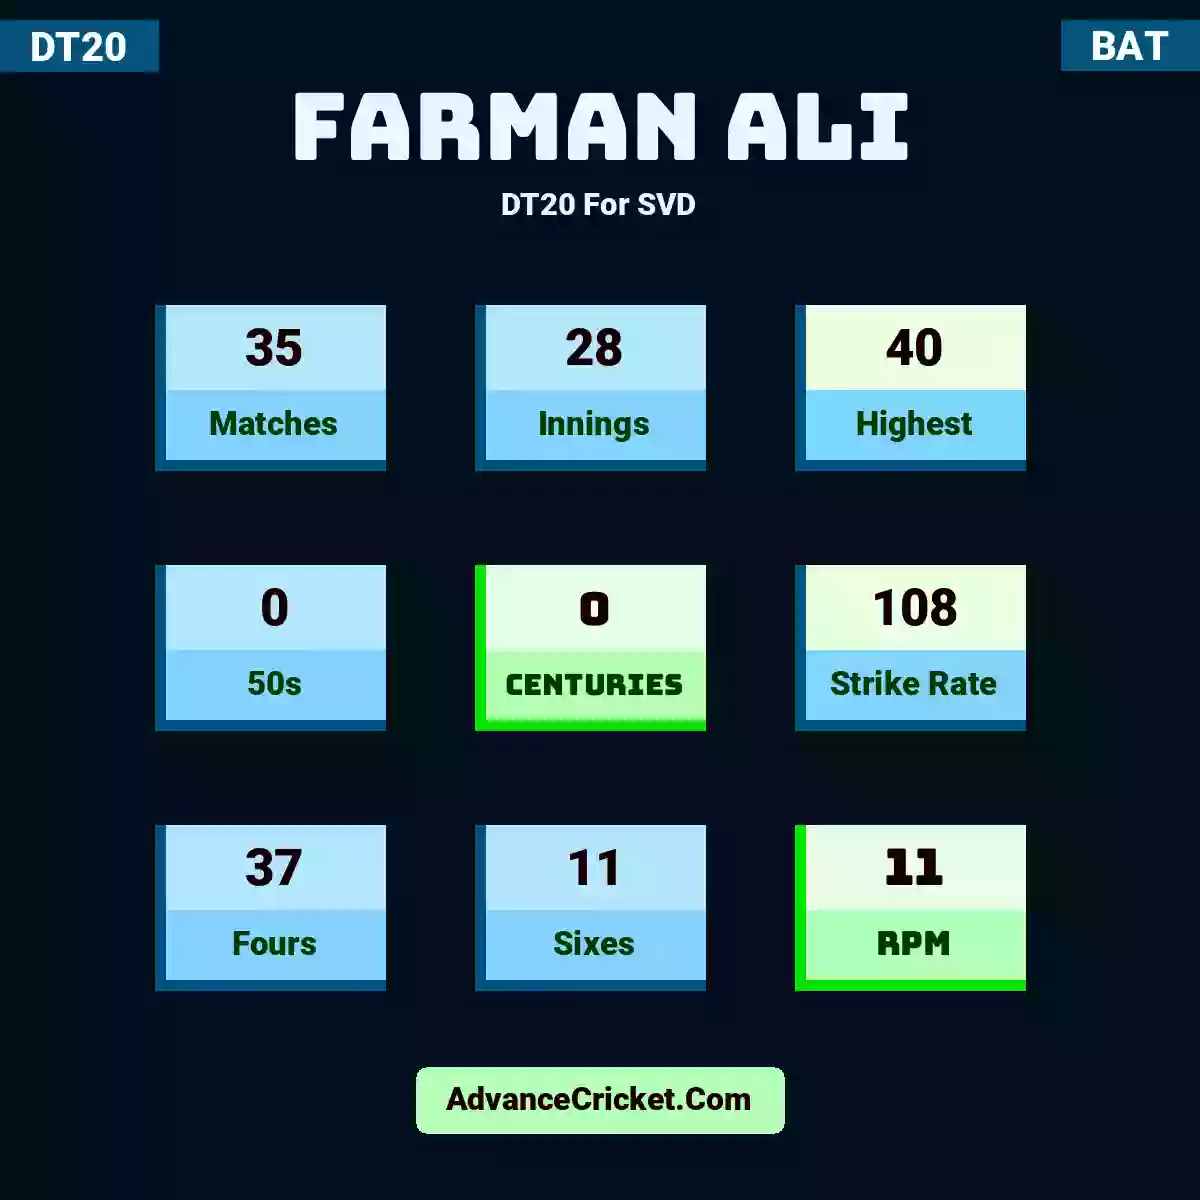 Farman Ali DT20  For SVD, Farman Ali played 35 matches, scored 40 runs as highest, 0 half-centuries, and 0 centuries, with a strike rate of 108. F.Ali hit 37 fours and 11 sixes, with an RPM of 11.